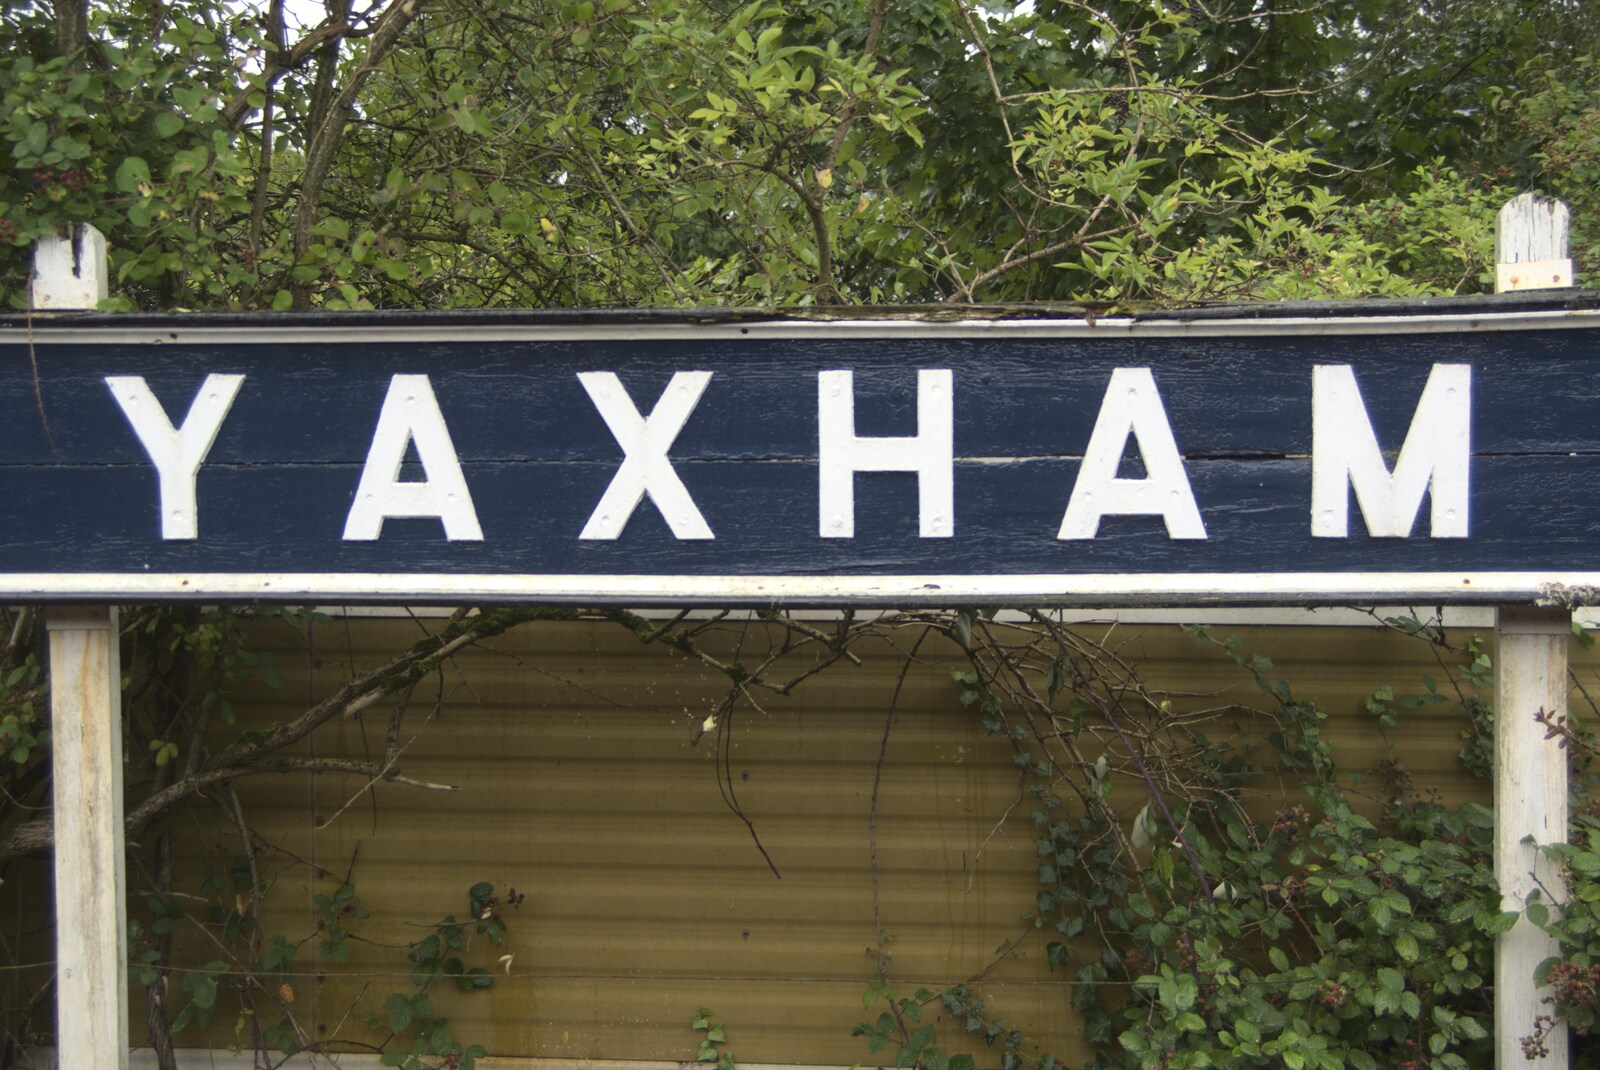 Camping with Trains, Yaxham, Norfolk - 29th August 2010: The Yaxham station sign